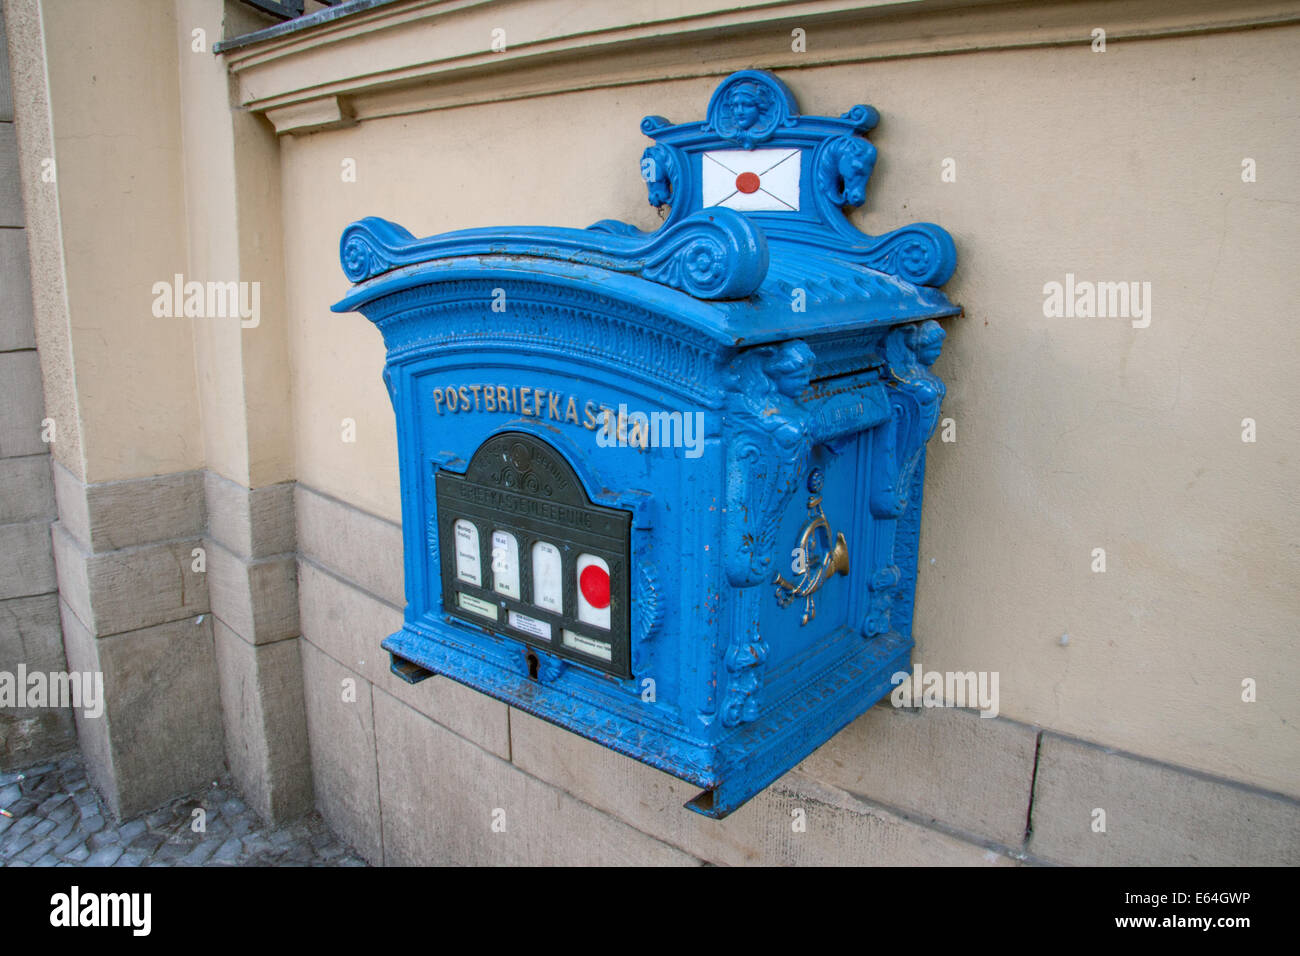 Communications Berlin High Resolution Stock Photography and Images - Alamy